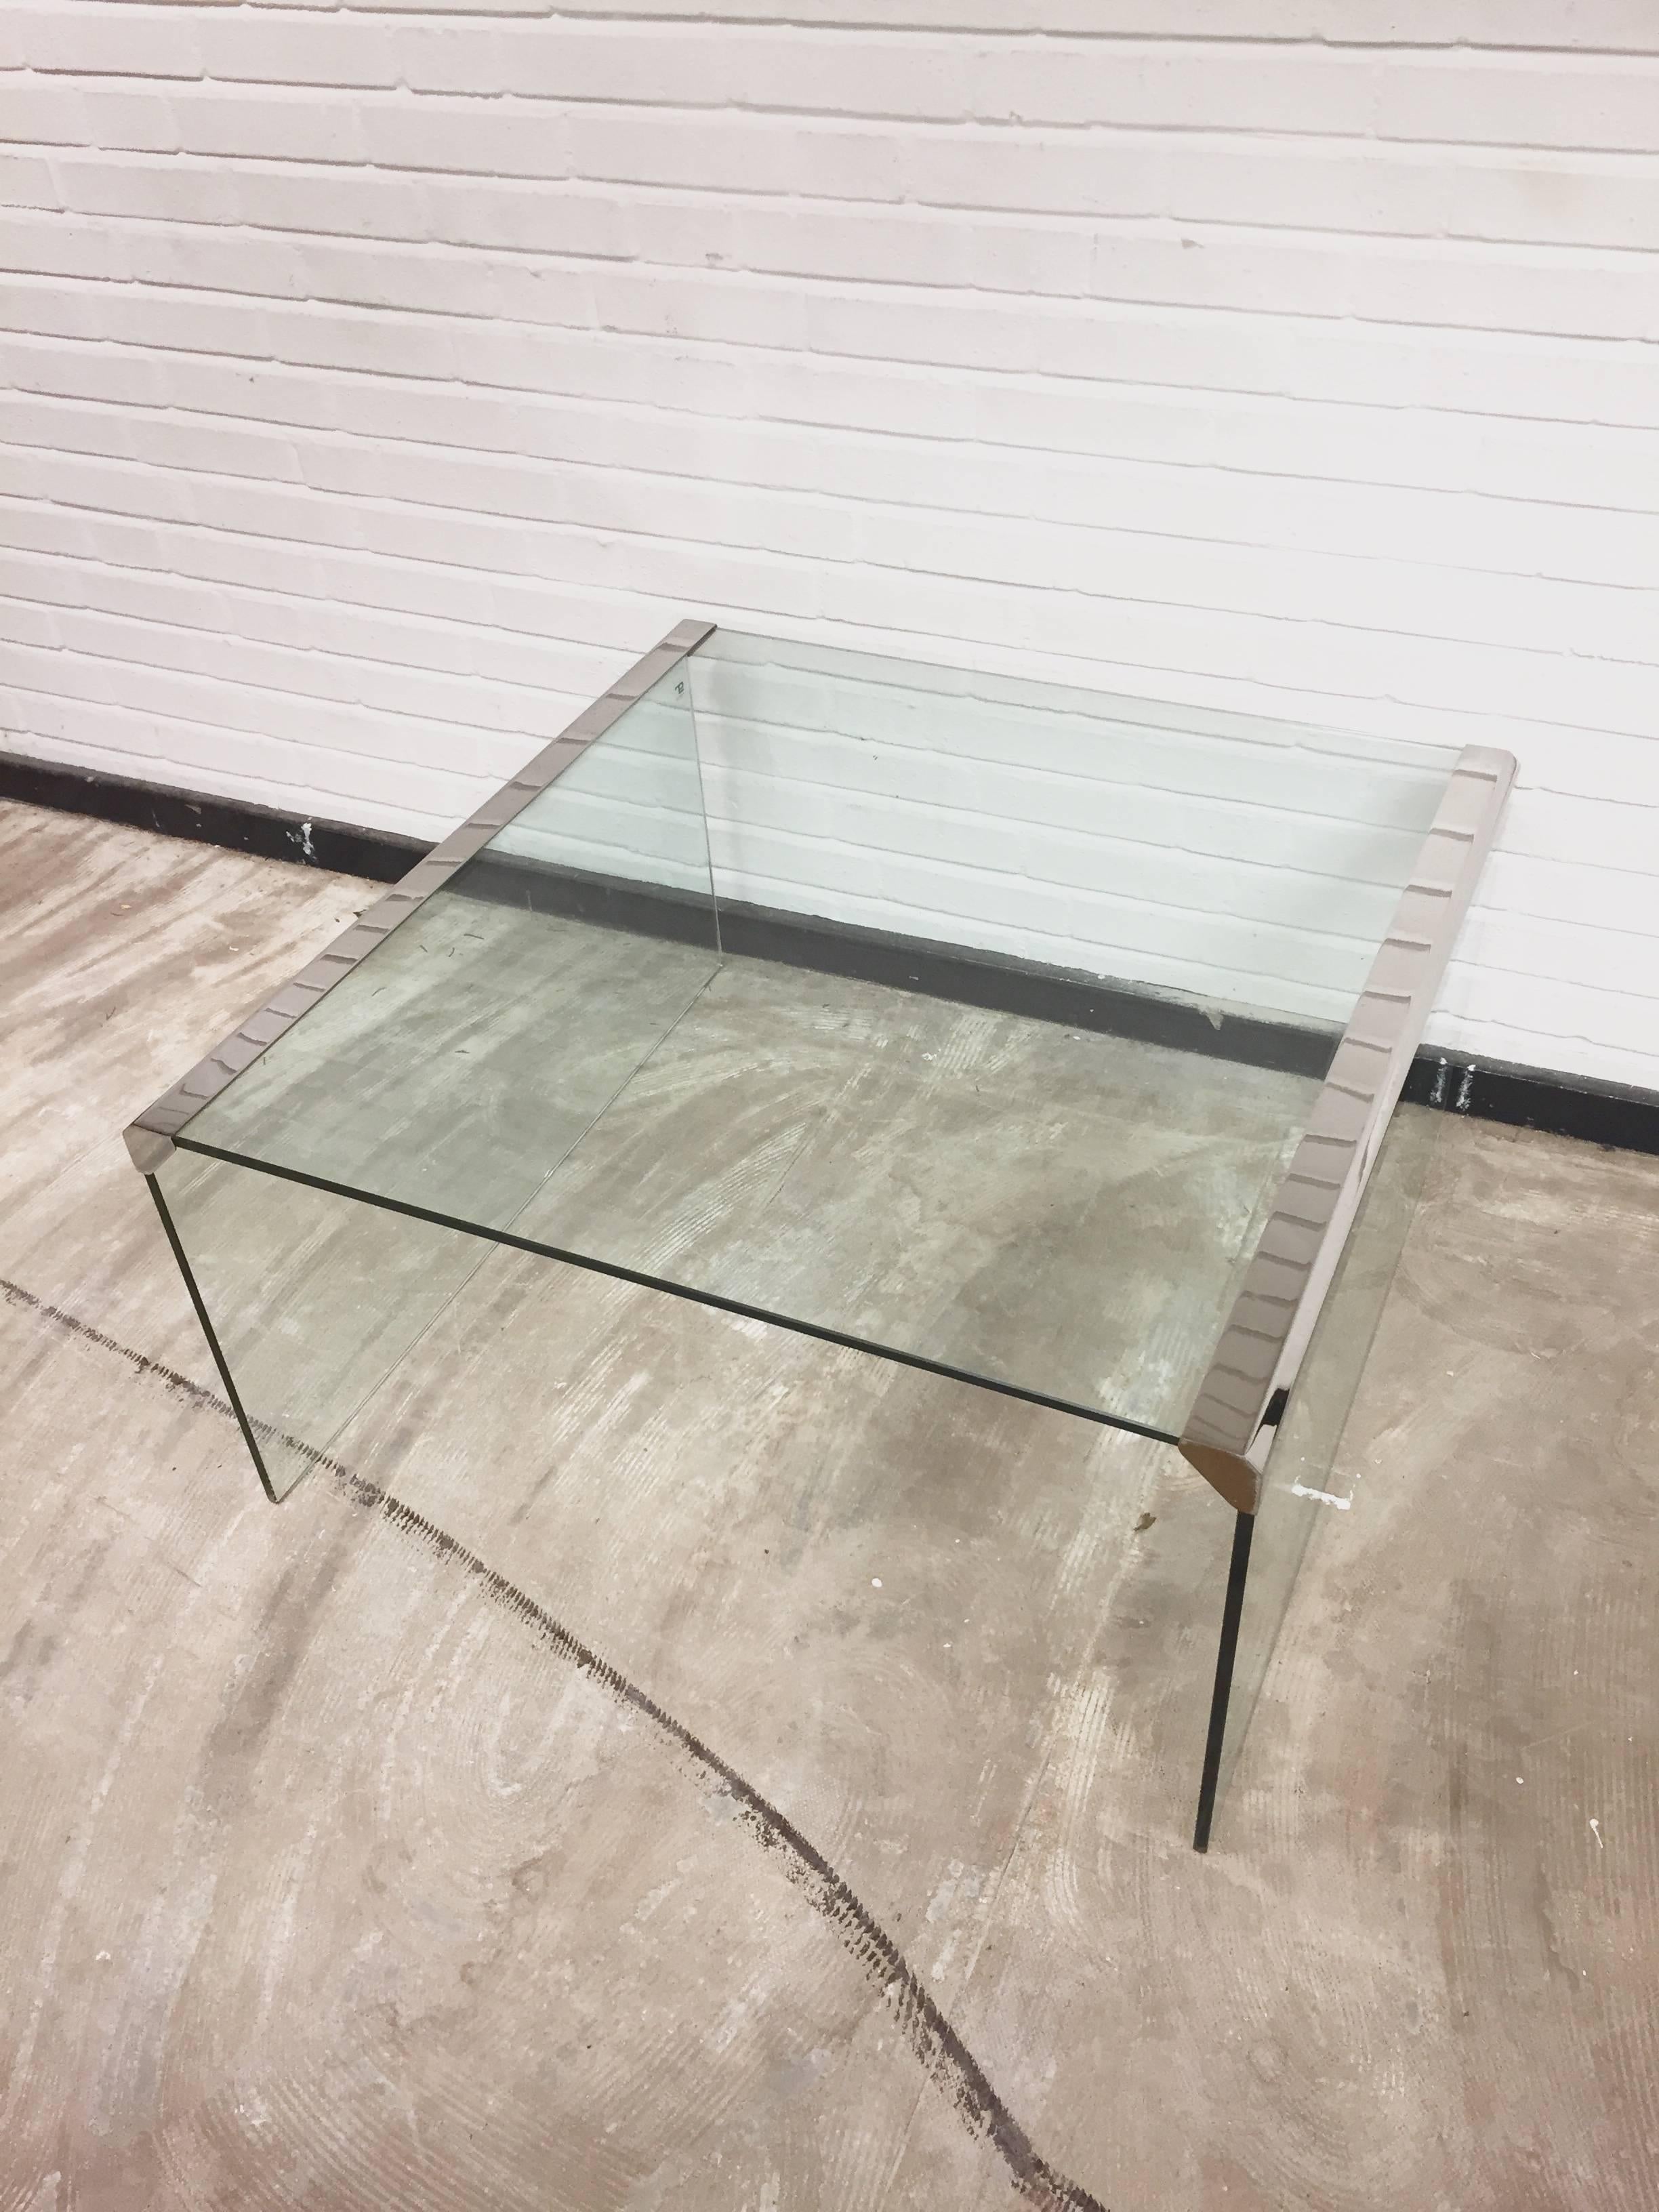 This coffee table, model T33, was designed by Pierangelo Gallotti for his company, Gallotti & Radice in 1982. It features a thick tempered transparent glass top with stainless steel edges. The table is in a good vintage condition with a few signs of